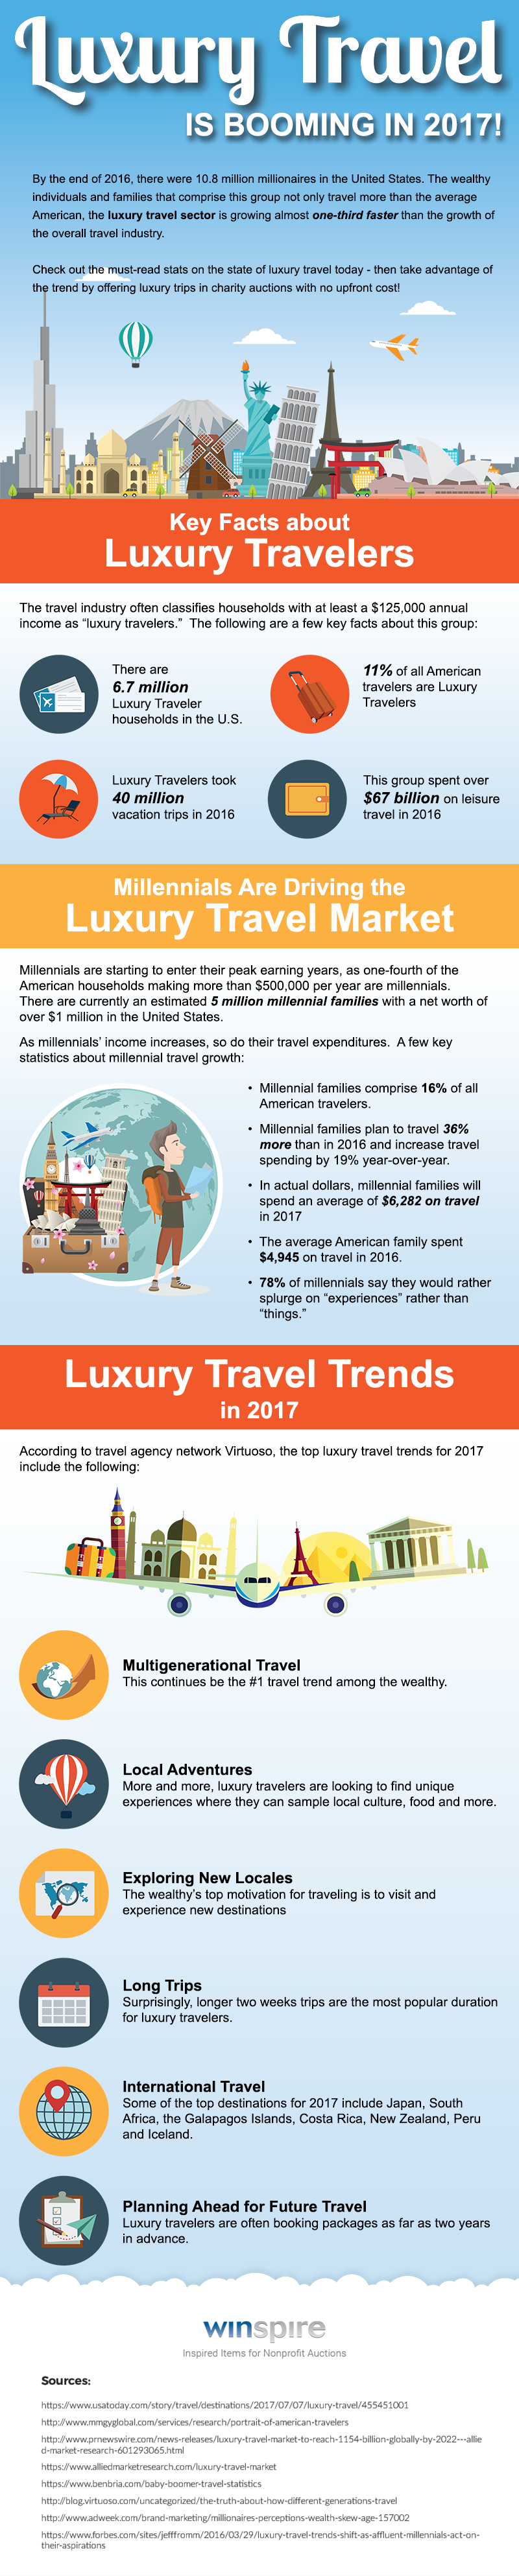 Luxury_Travel_Is_Booming-Infographic.png